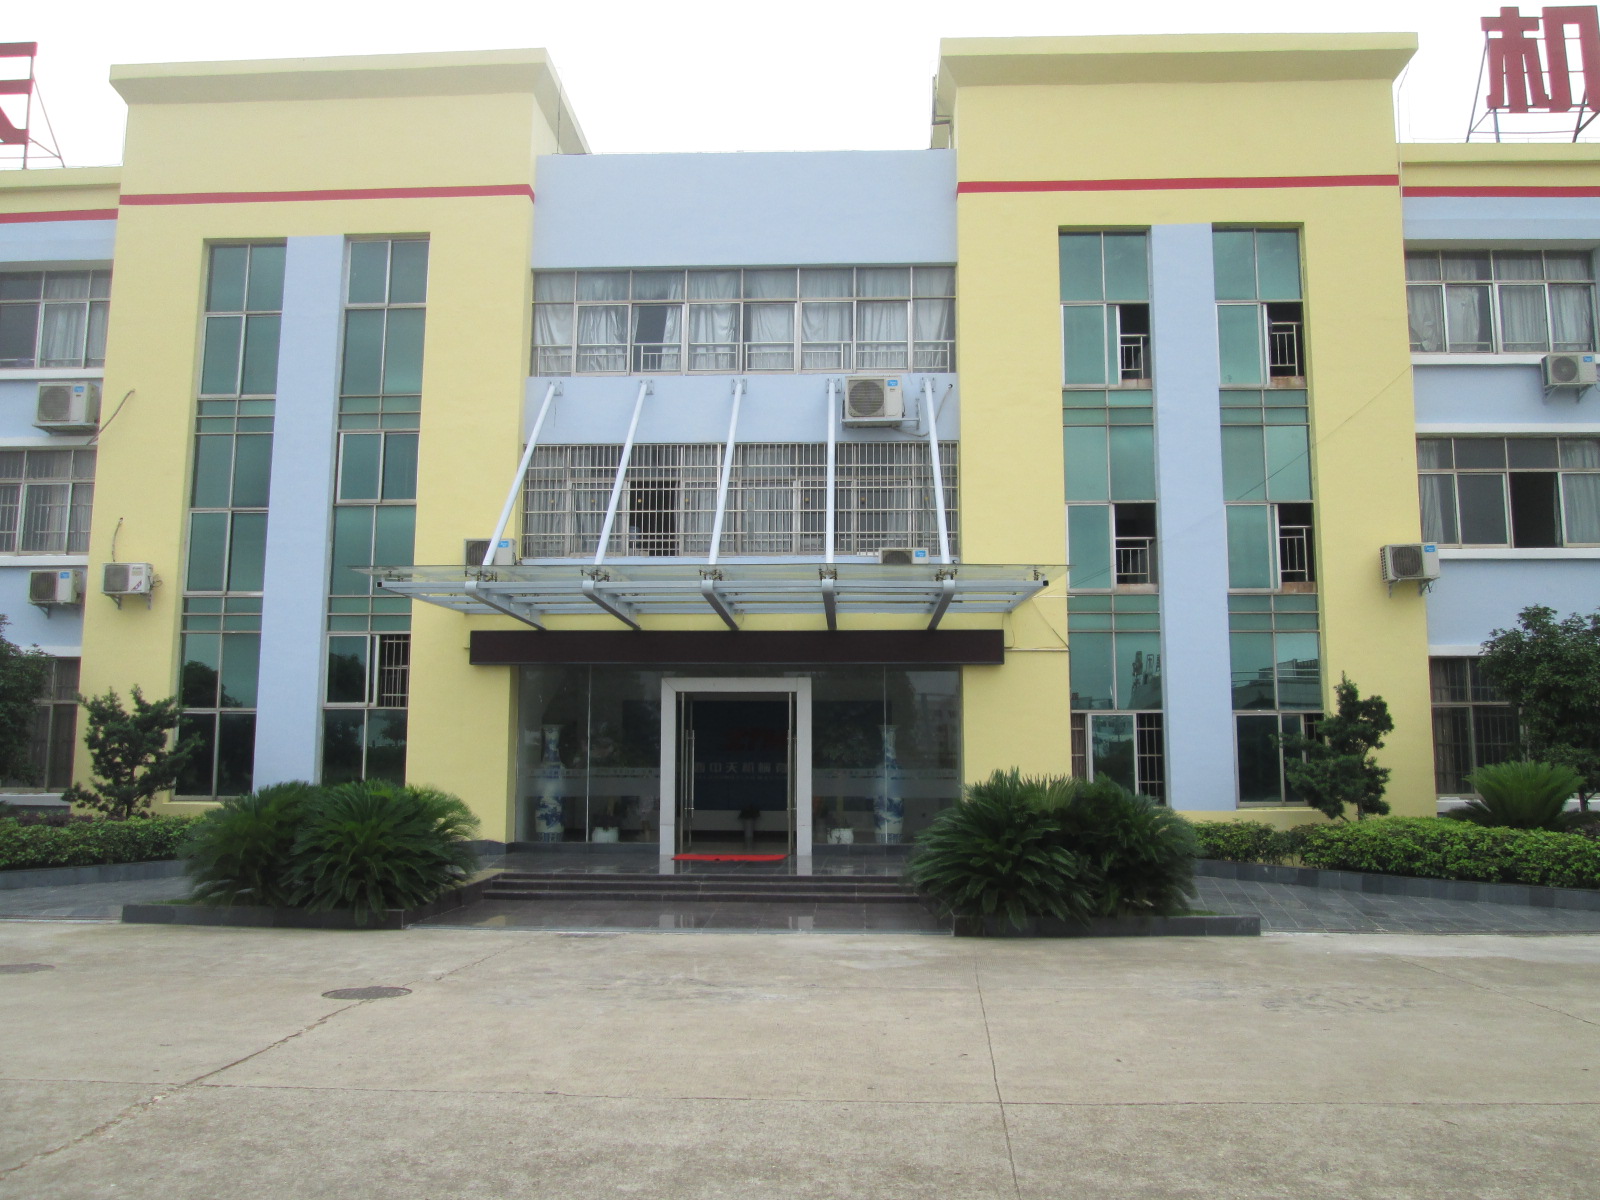  Administration Building